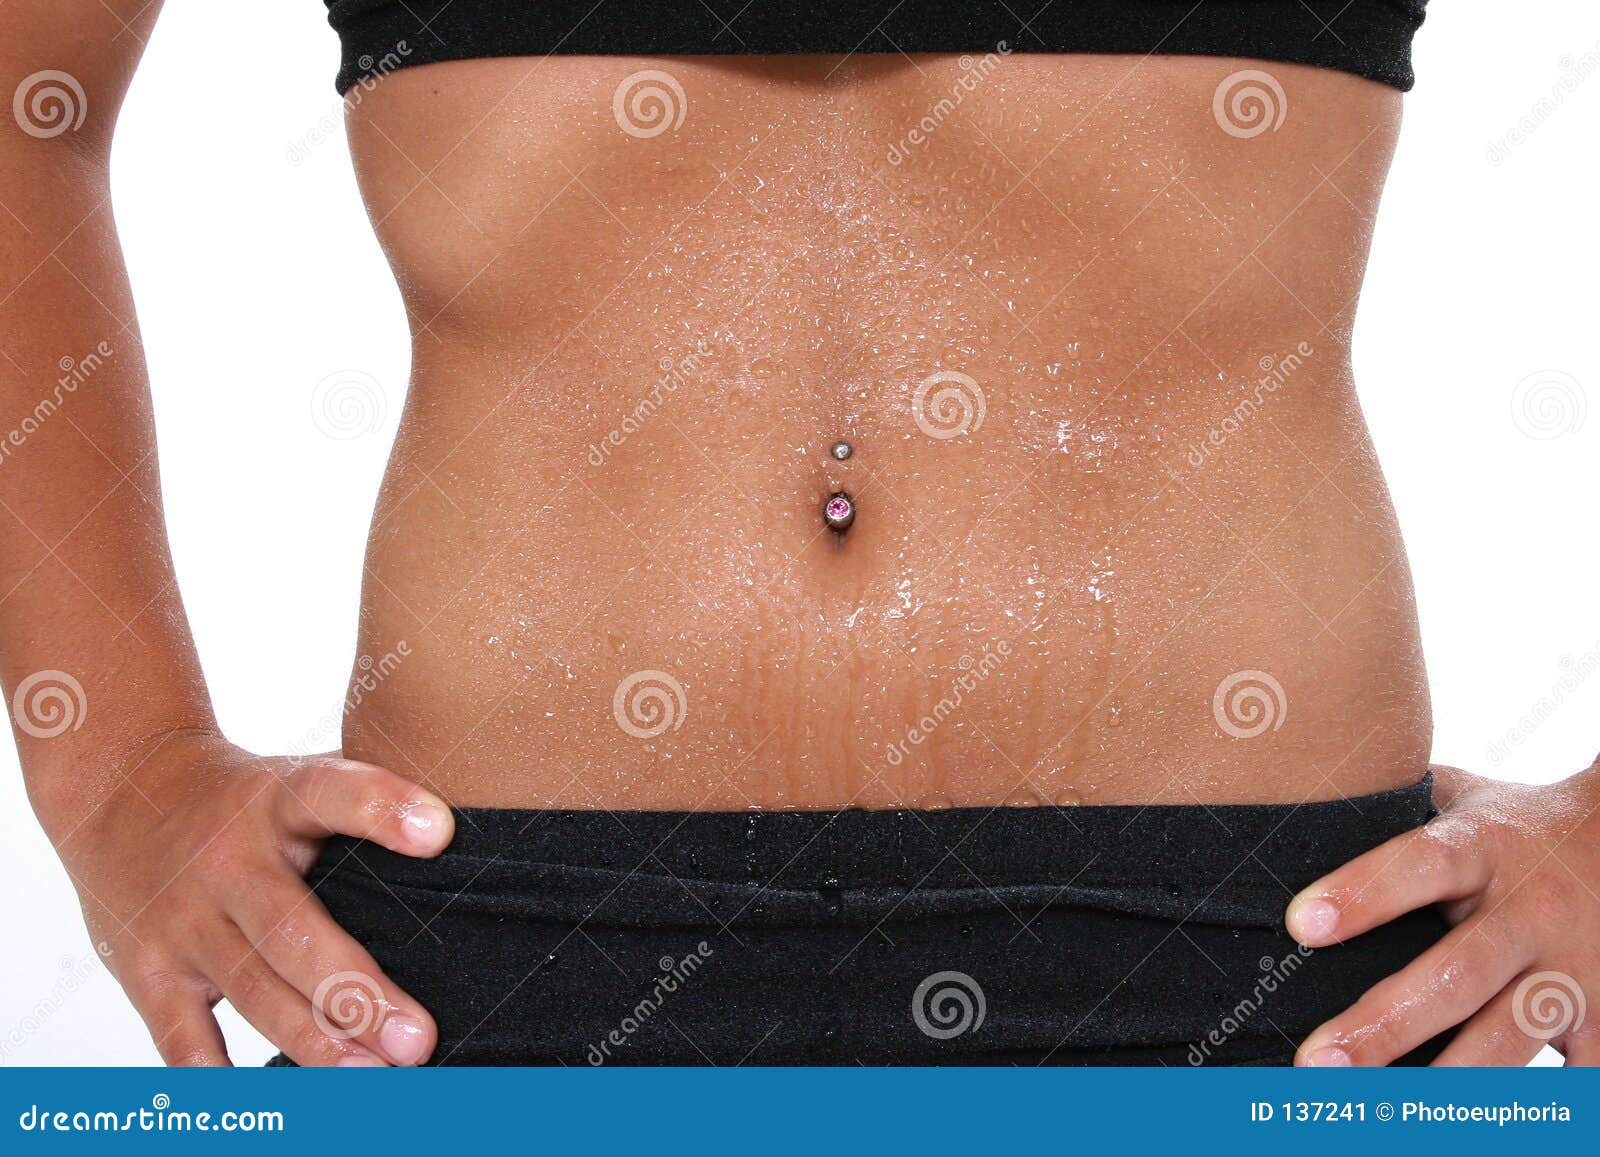 abdomen in workout clothes covered in sweat